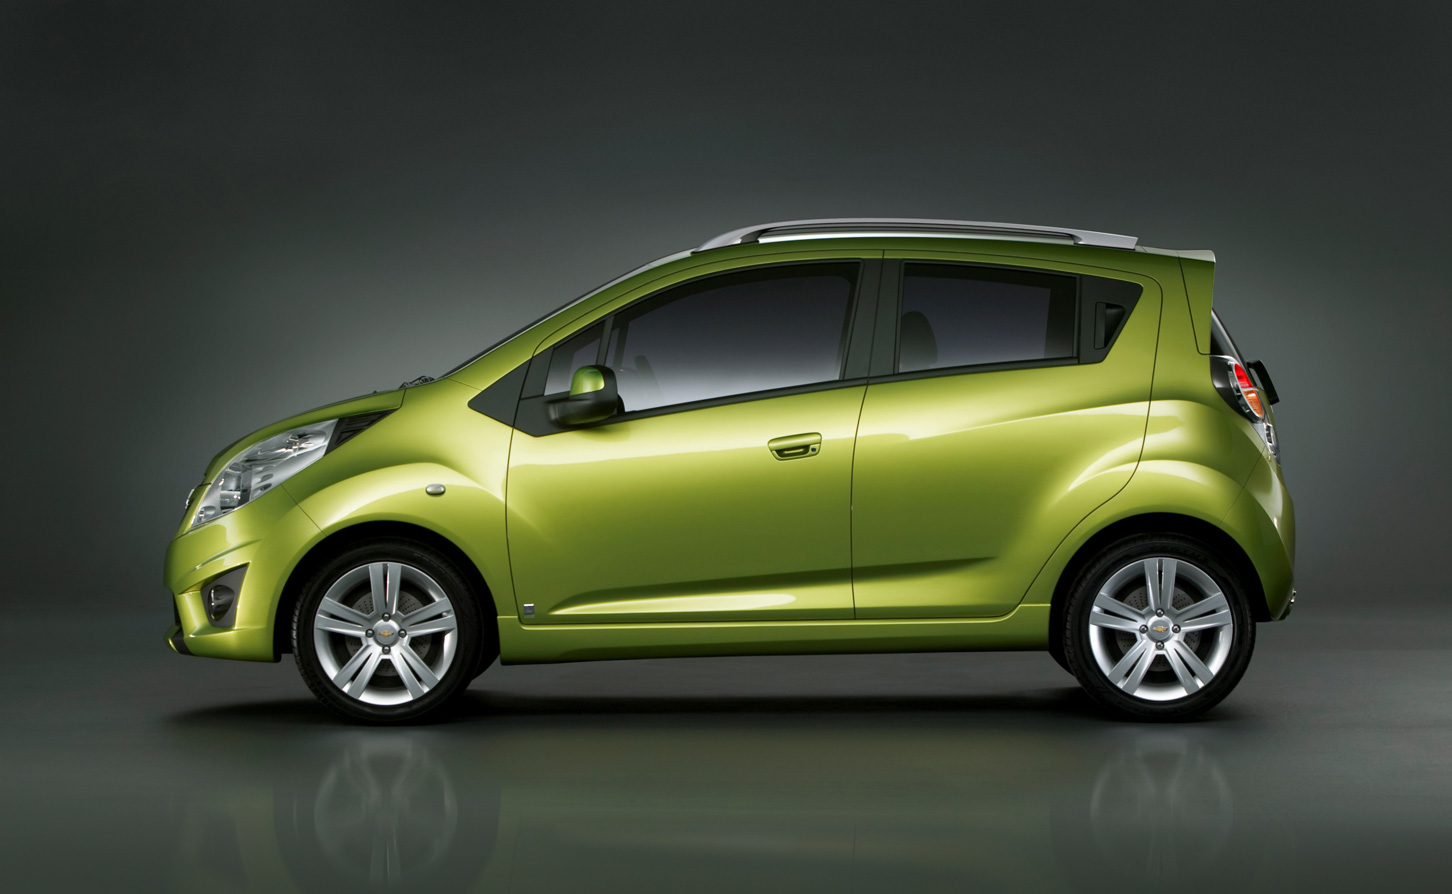 Officially Official: Chevy Spark Confirmed For U.S. In Early 2012 | GM ...